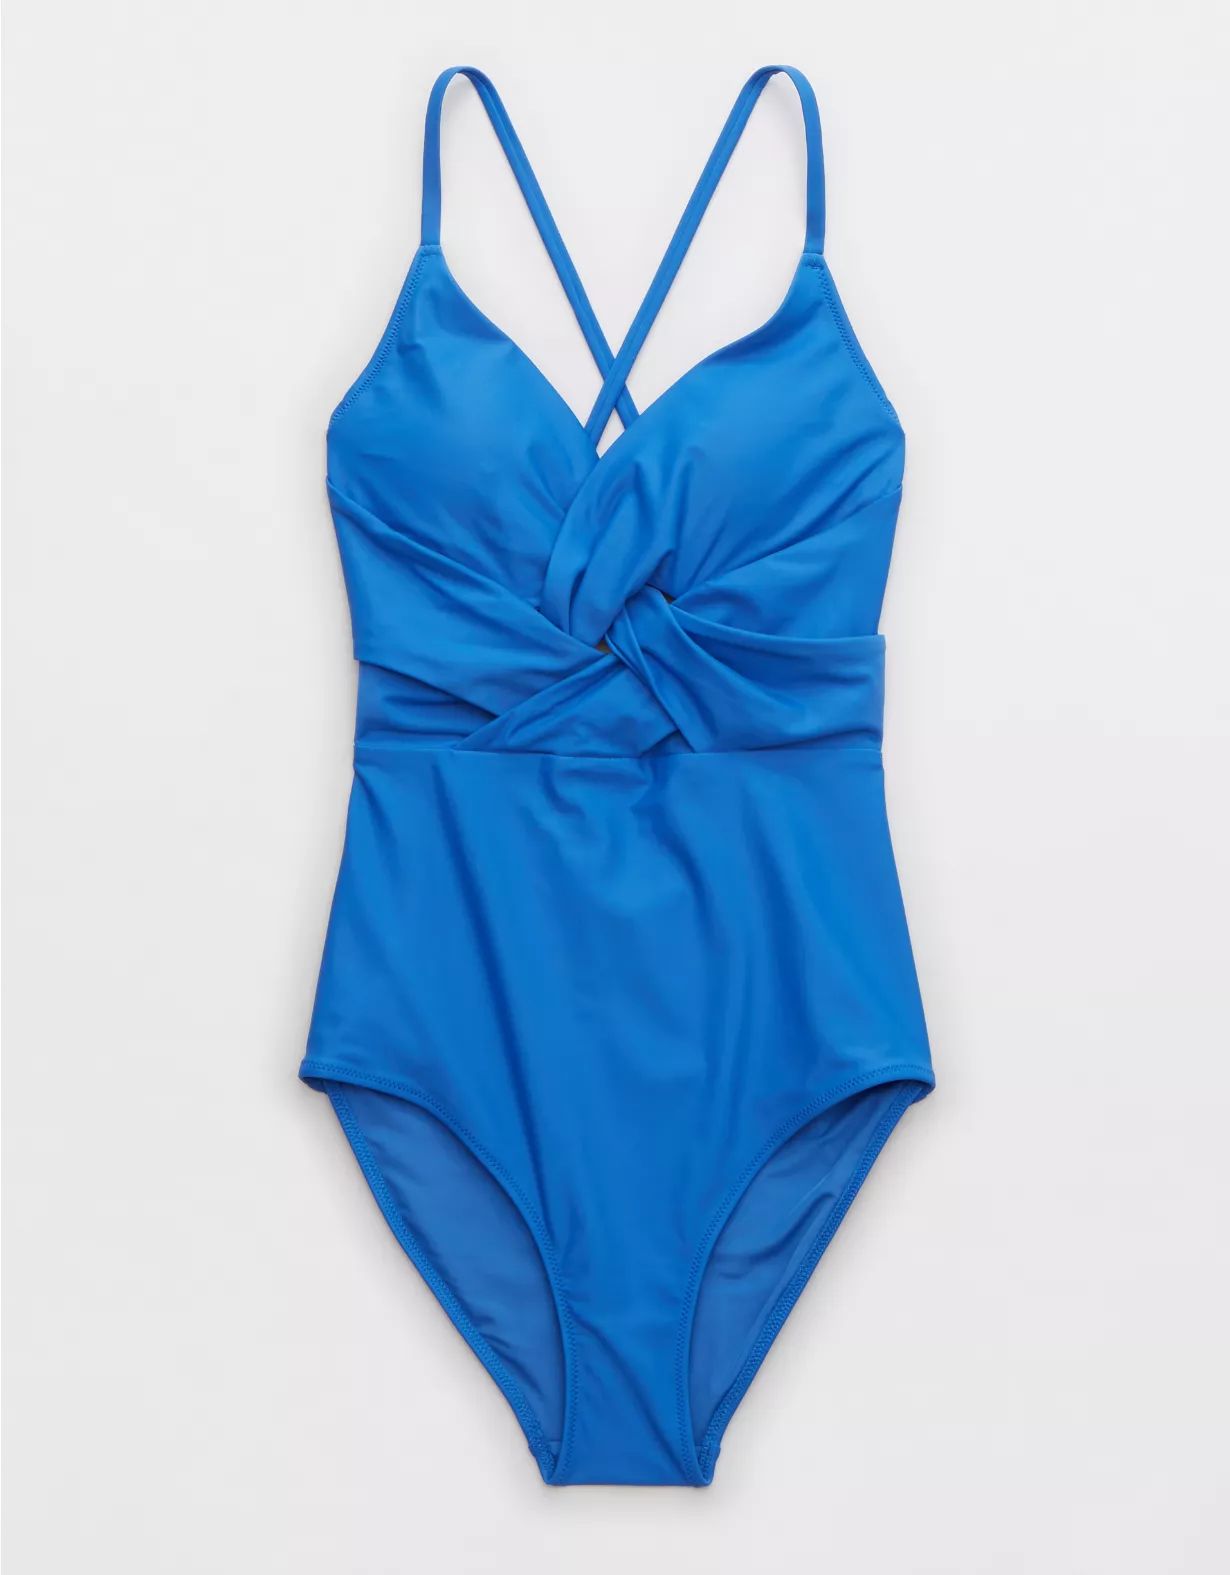 Aerie Braided One Piece Swimsuit | Aerie